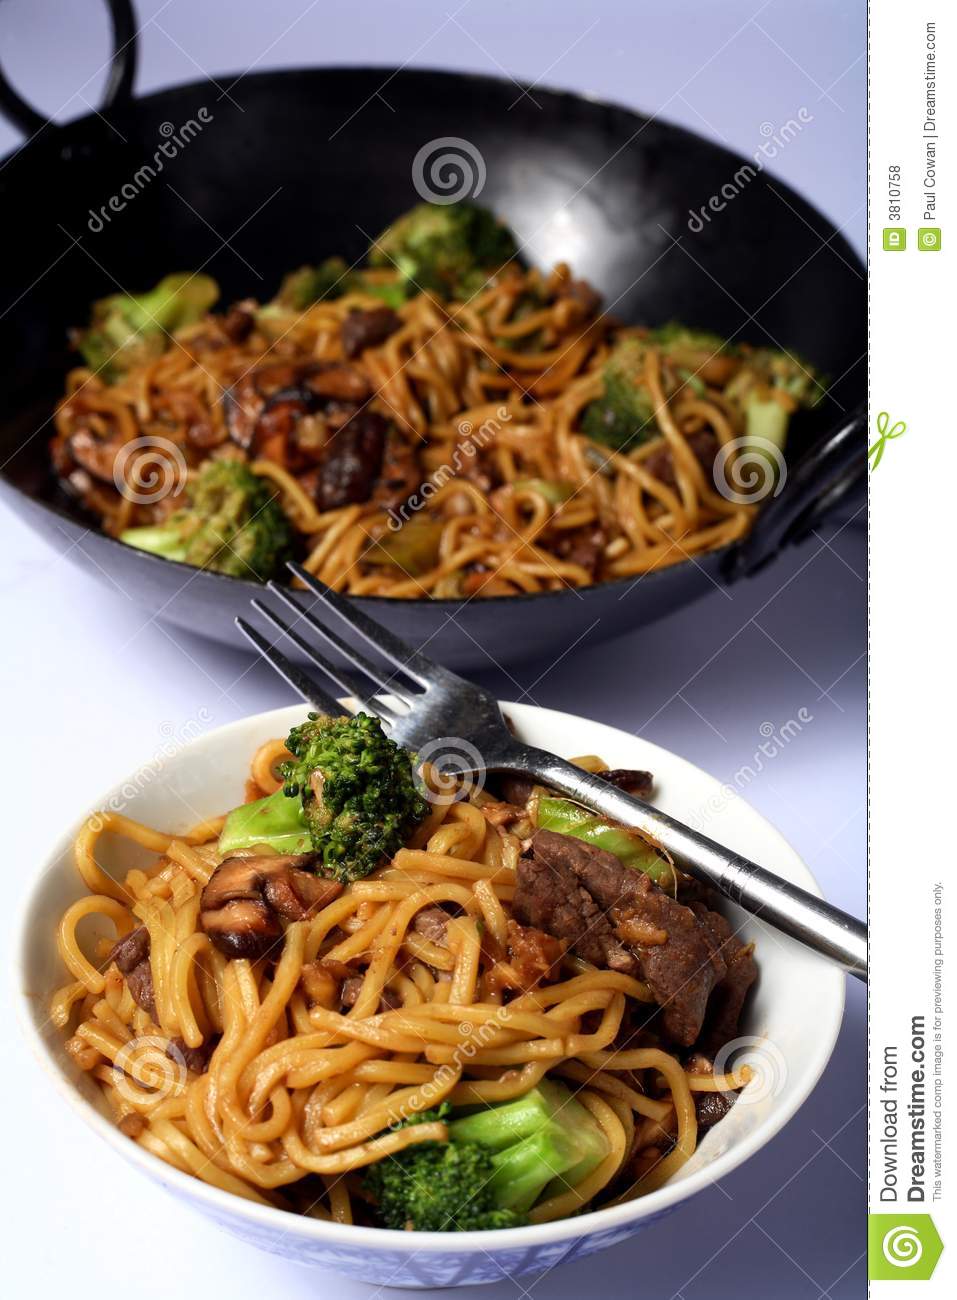 Beef Ramen Egg Noodles In Bowl Royalty Free Stock Photos   Image    